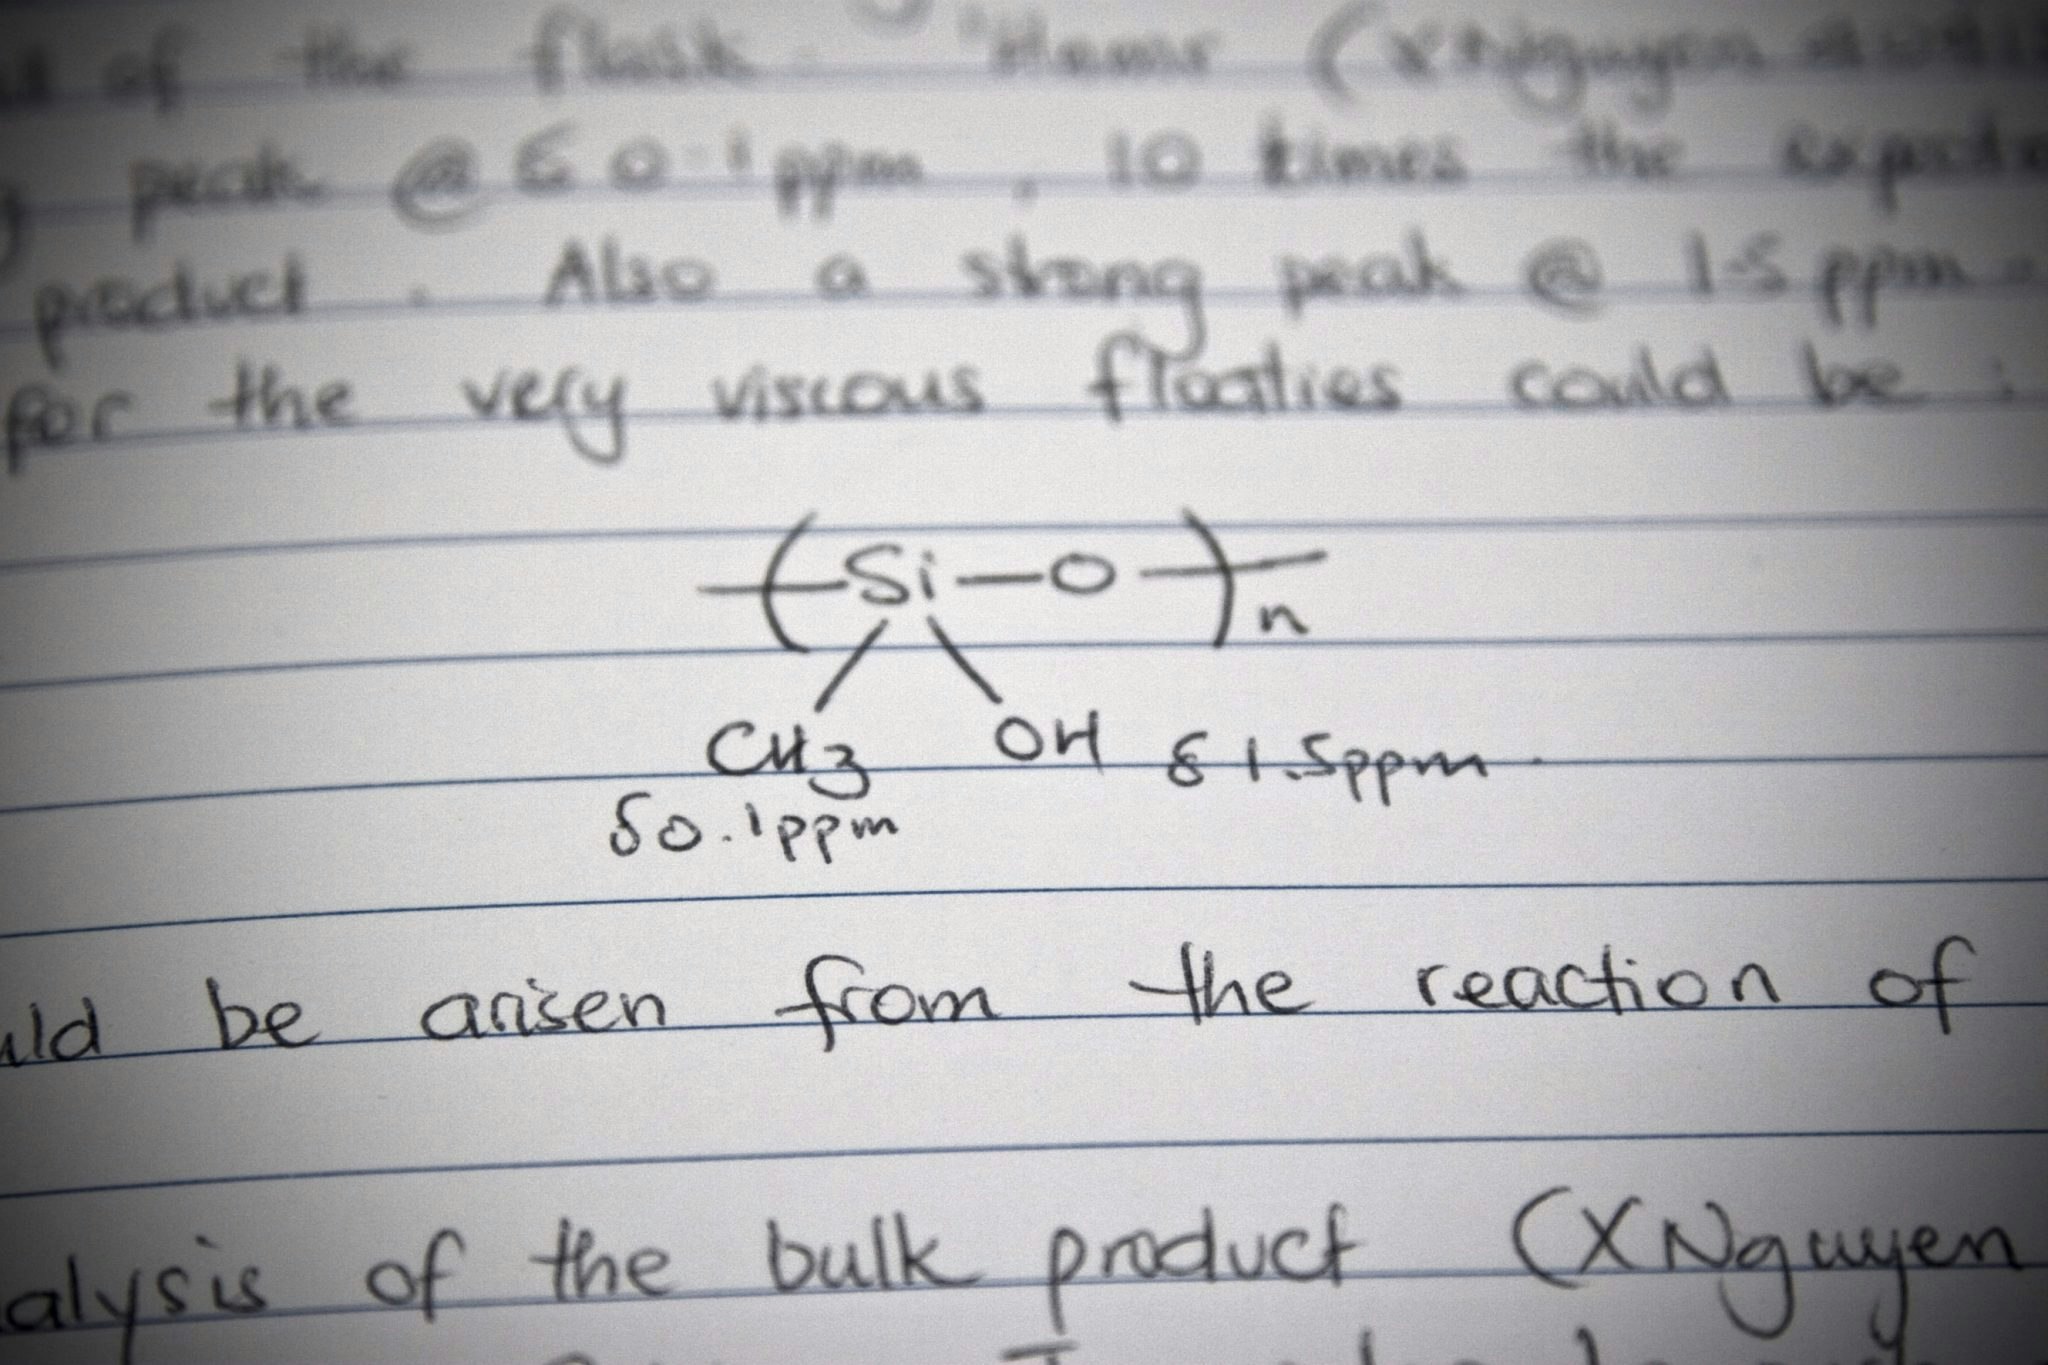 Handwritten entry in a science lab notebook